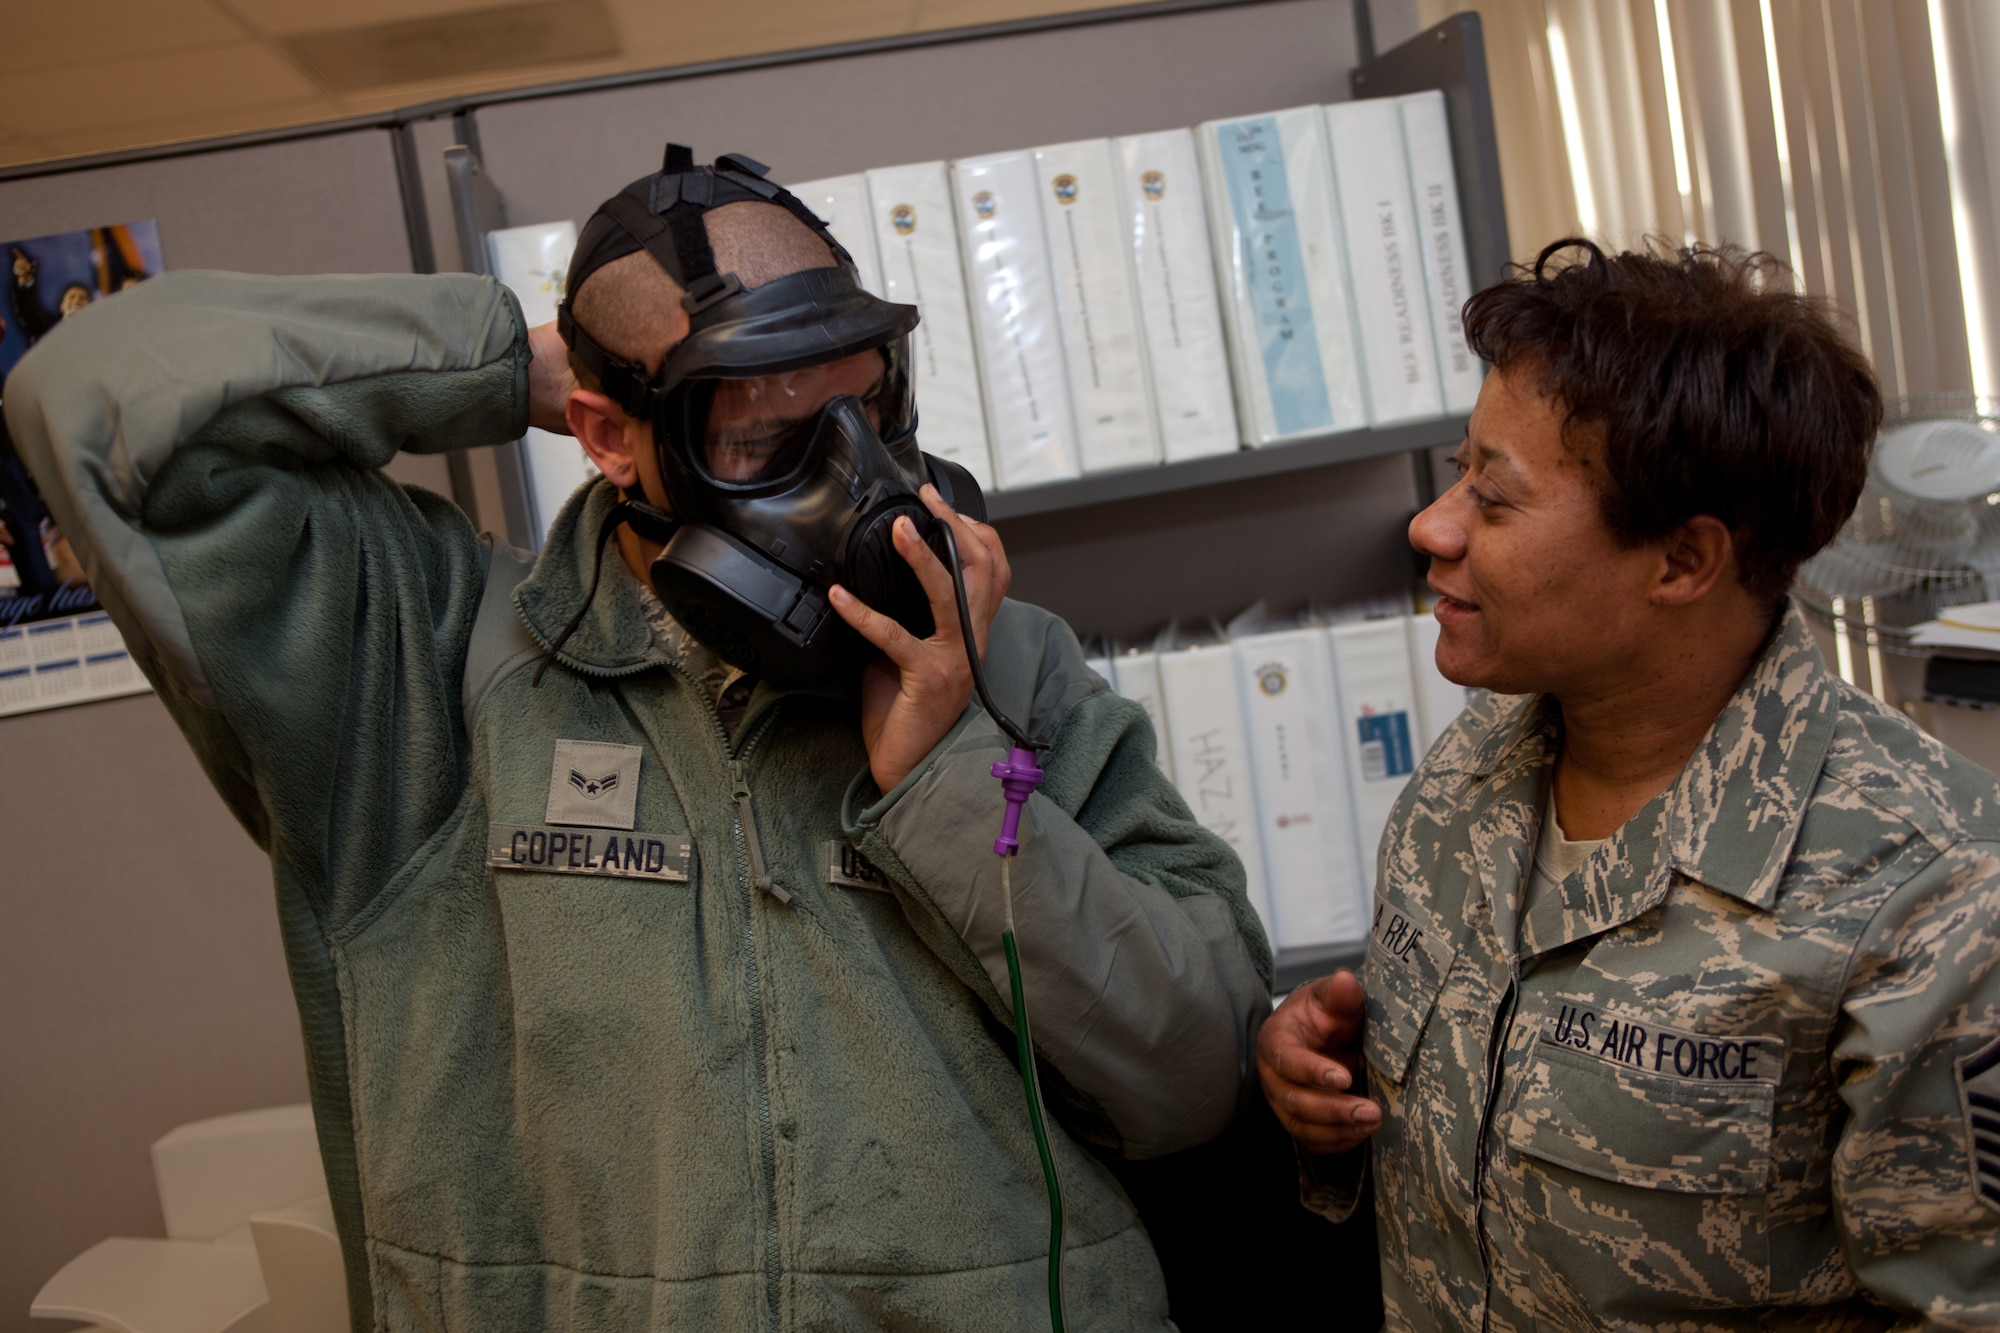 MSgt. Ollie La Rue inspects A1C Carl Copeland’s gas mask during a gas mask fit test. The D.C. Air National Guard is replacing all MCU-2 A/P gas masks with the new M50 gas mask. The new M50 gas mask has twin conformal filters, which allow 50 percent improvement in breathing resistance, and allows for over 24 hours of protection against chemical or biological agents and radioactive particulate matter. (U.S. Air Force Photo by Tech Sgt. Gareth Buckland)